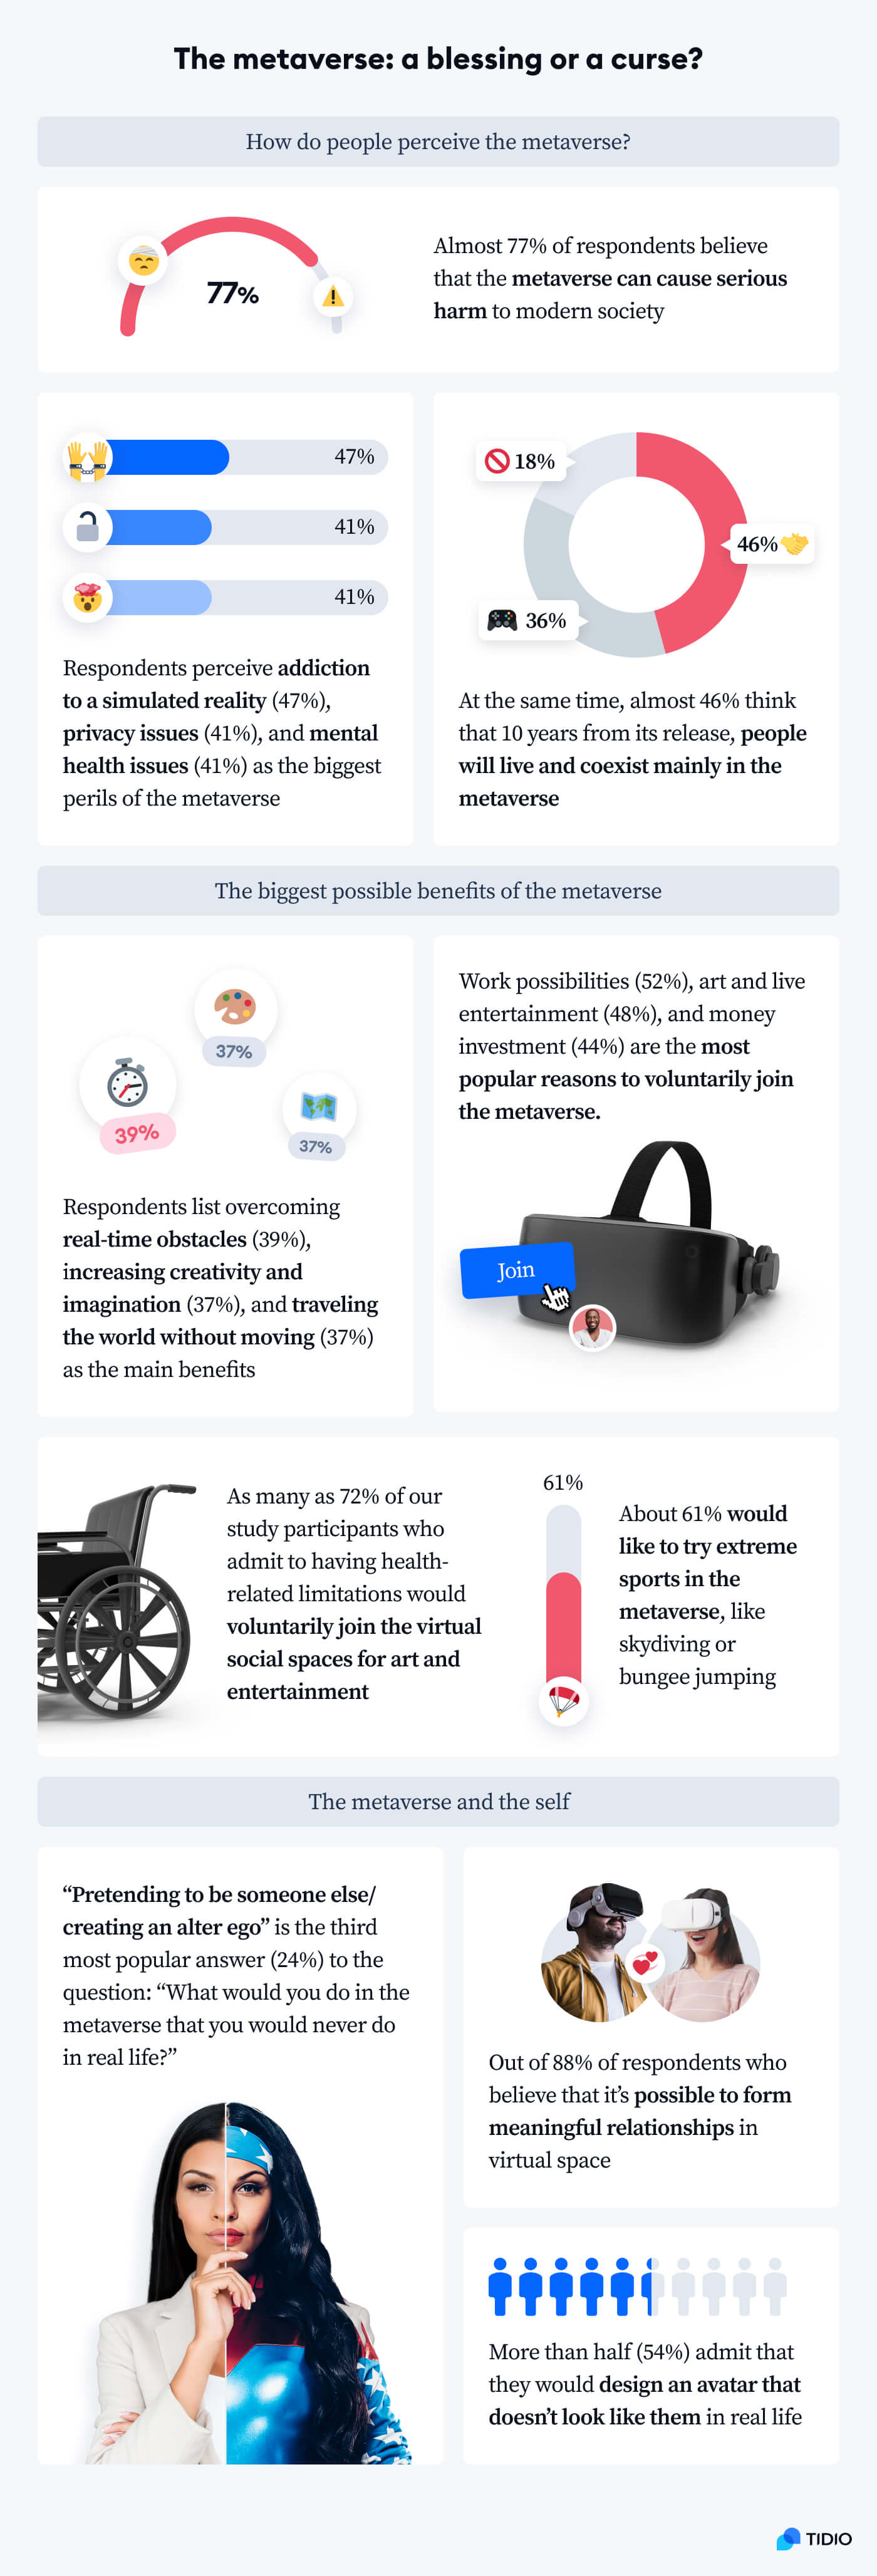 The metaverse: a hope or doom? - infographic presenting the most important finding from this research